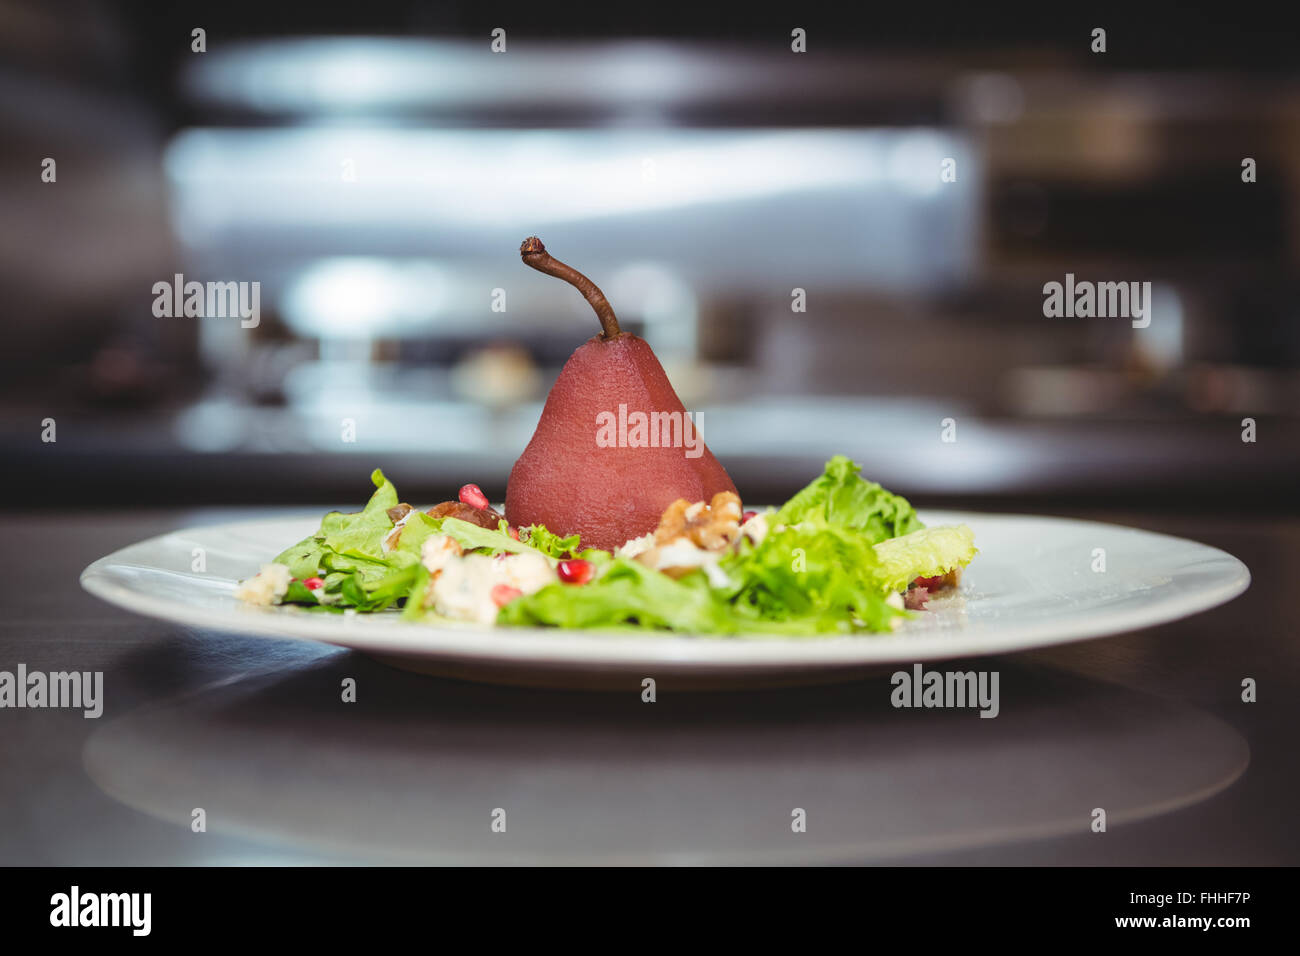 Poached pear with salad Stock Photo